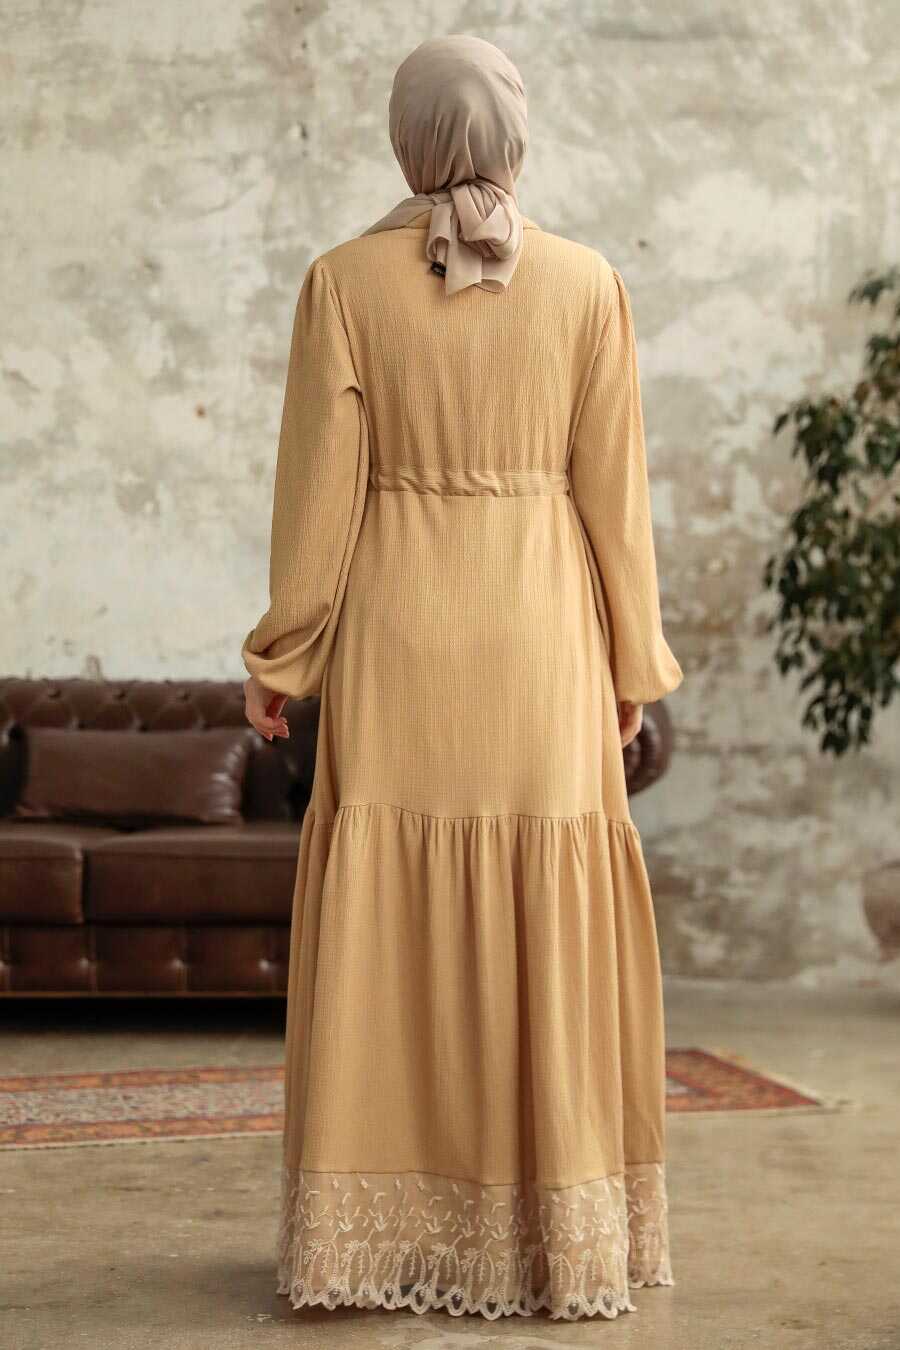 Neva Style - Biscuit High Quality Dress 5878BS